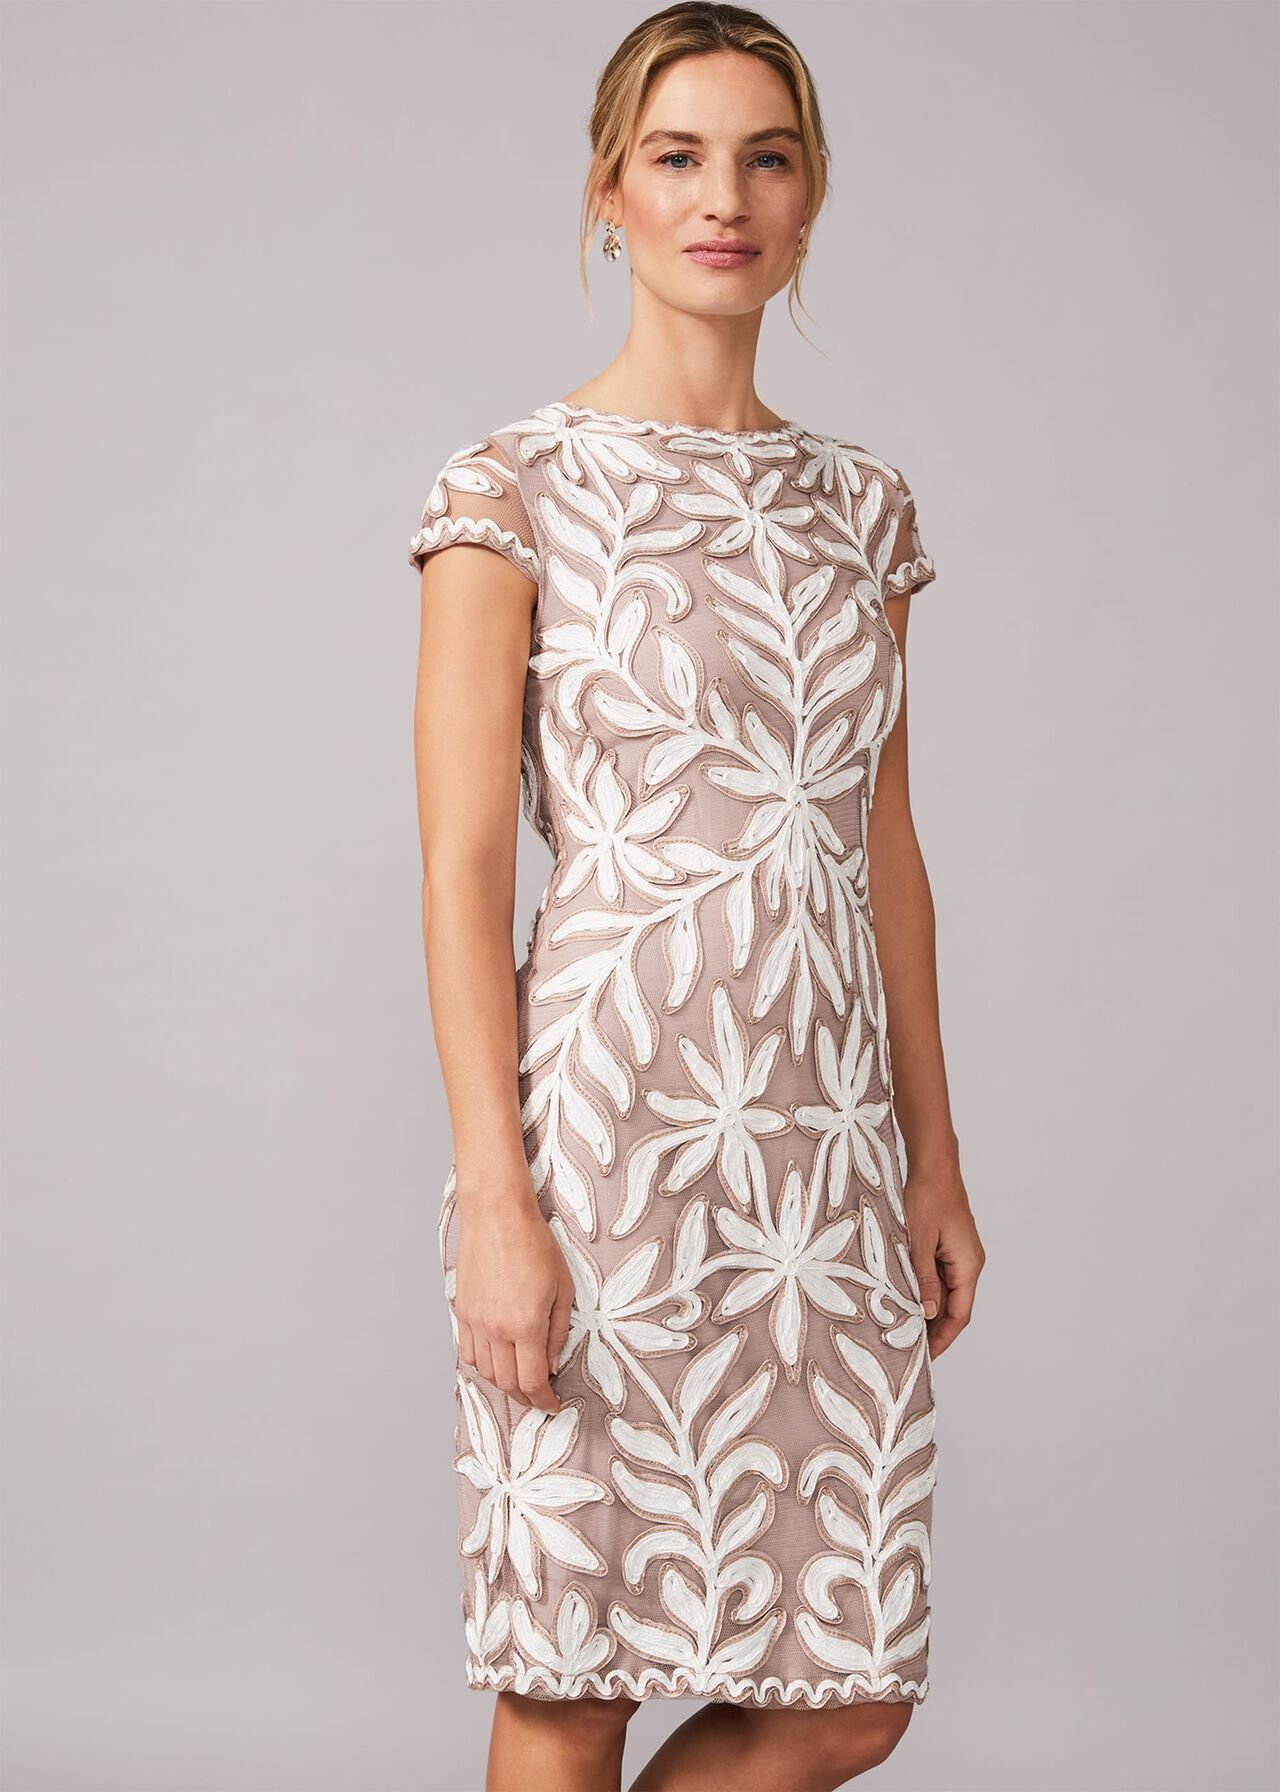 Isobel Tapework Lace Fitted Dress